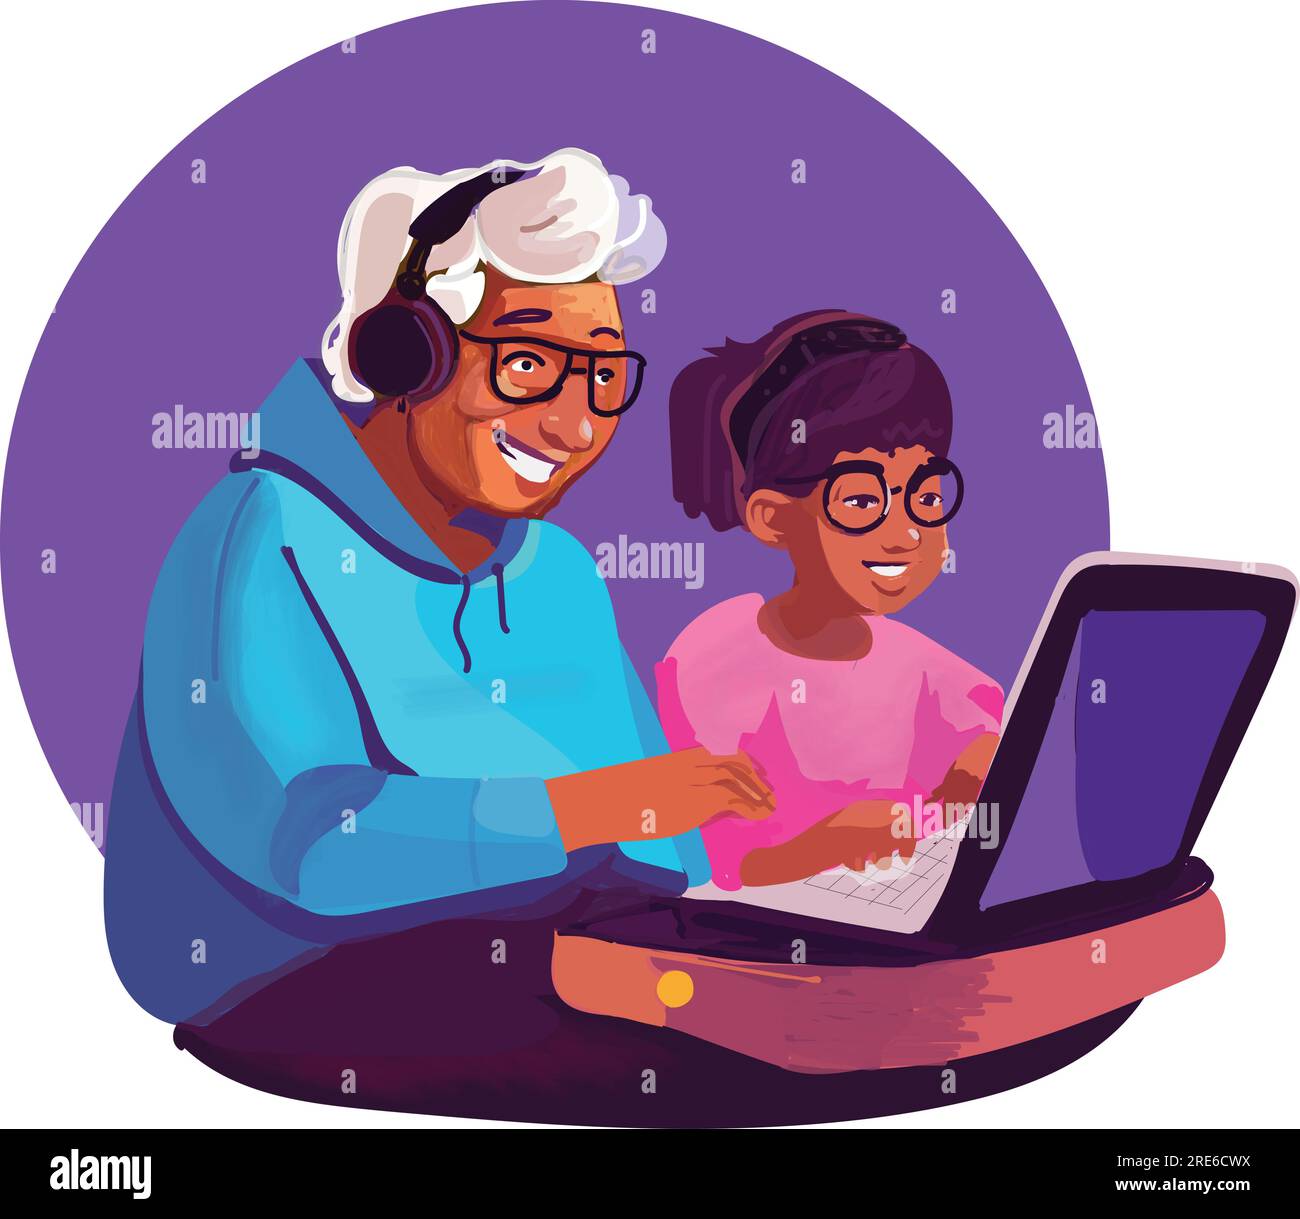 Vector illustration of a grandmother playing computer games with her granddaughter, elderly and technology concept Stock Vector